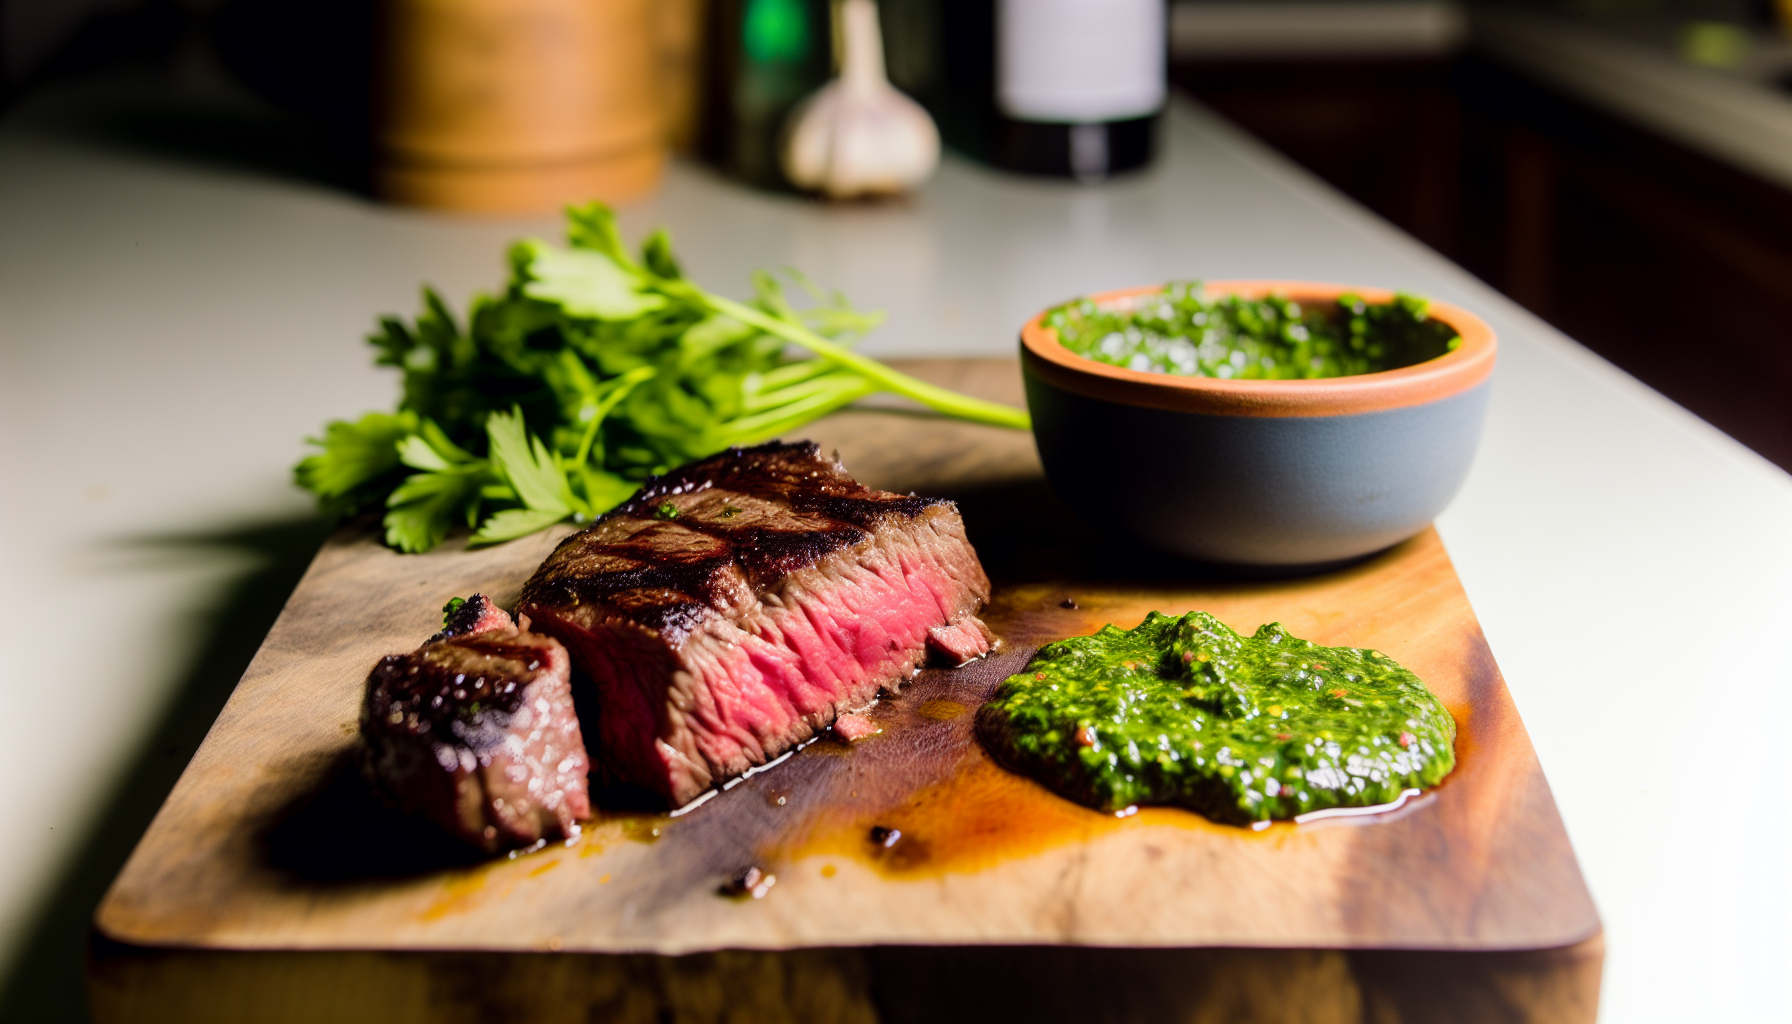 A traditional Argentine steak with chimichurri sauce